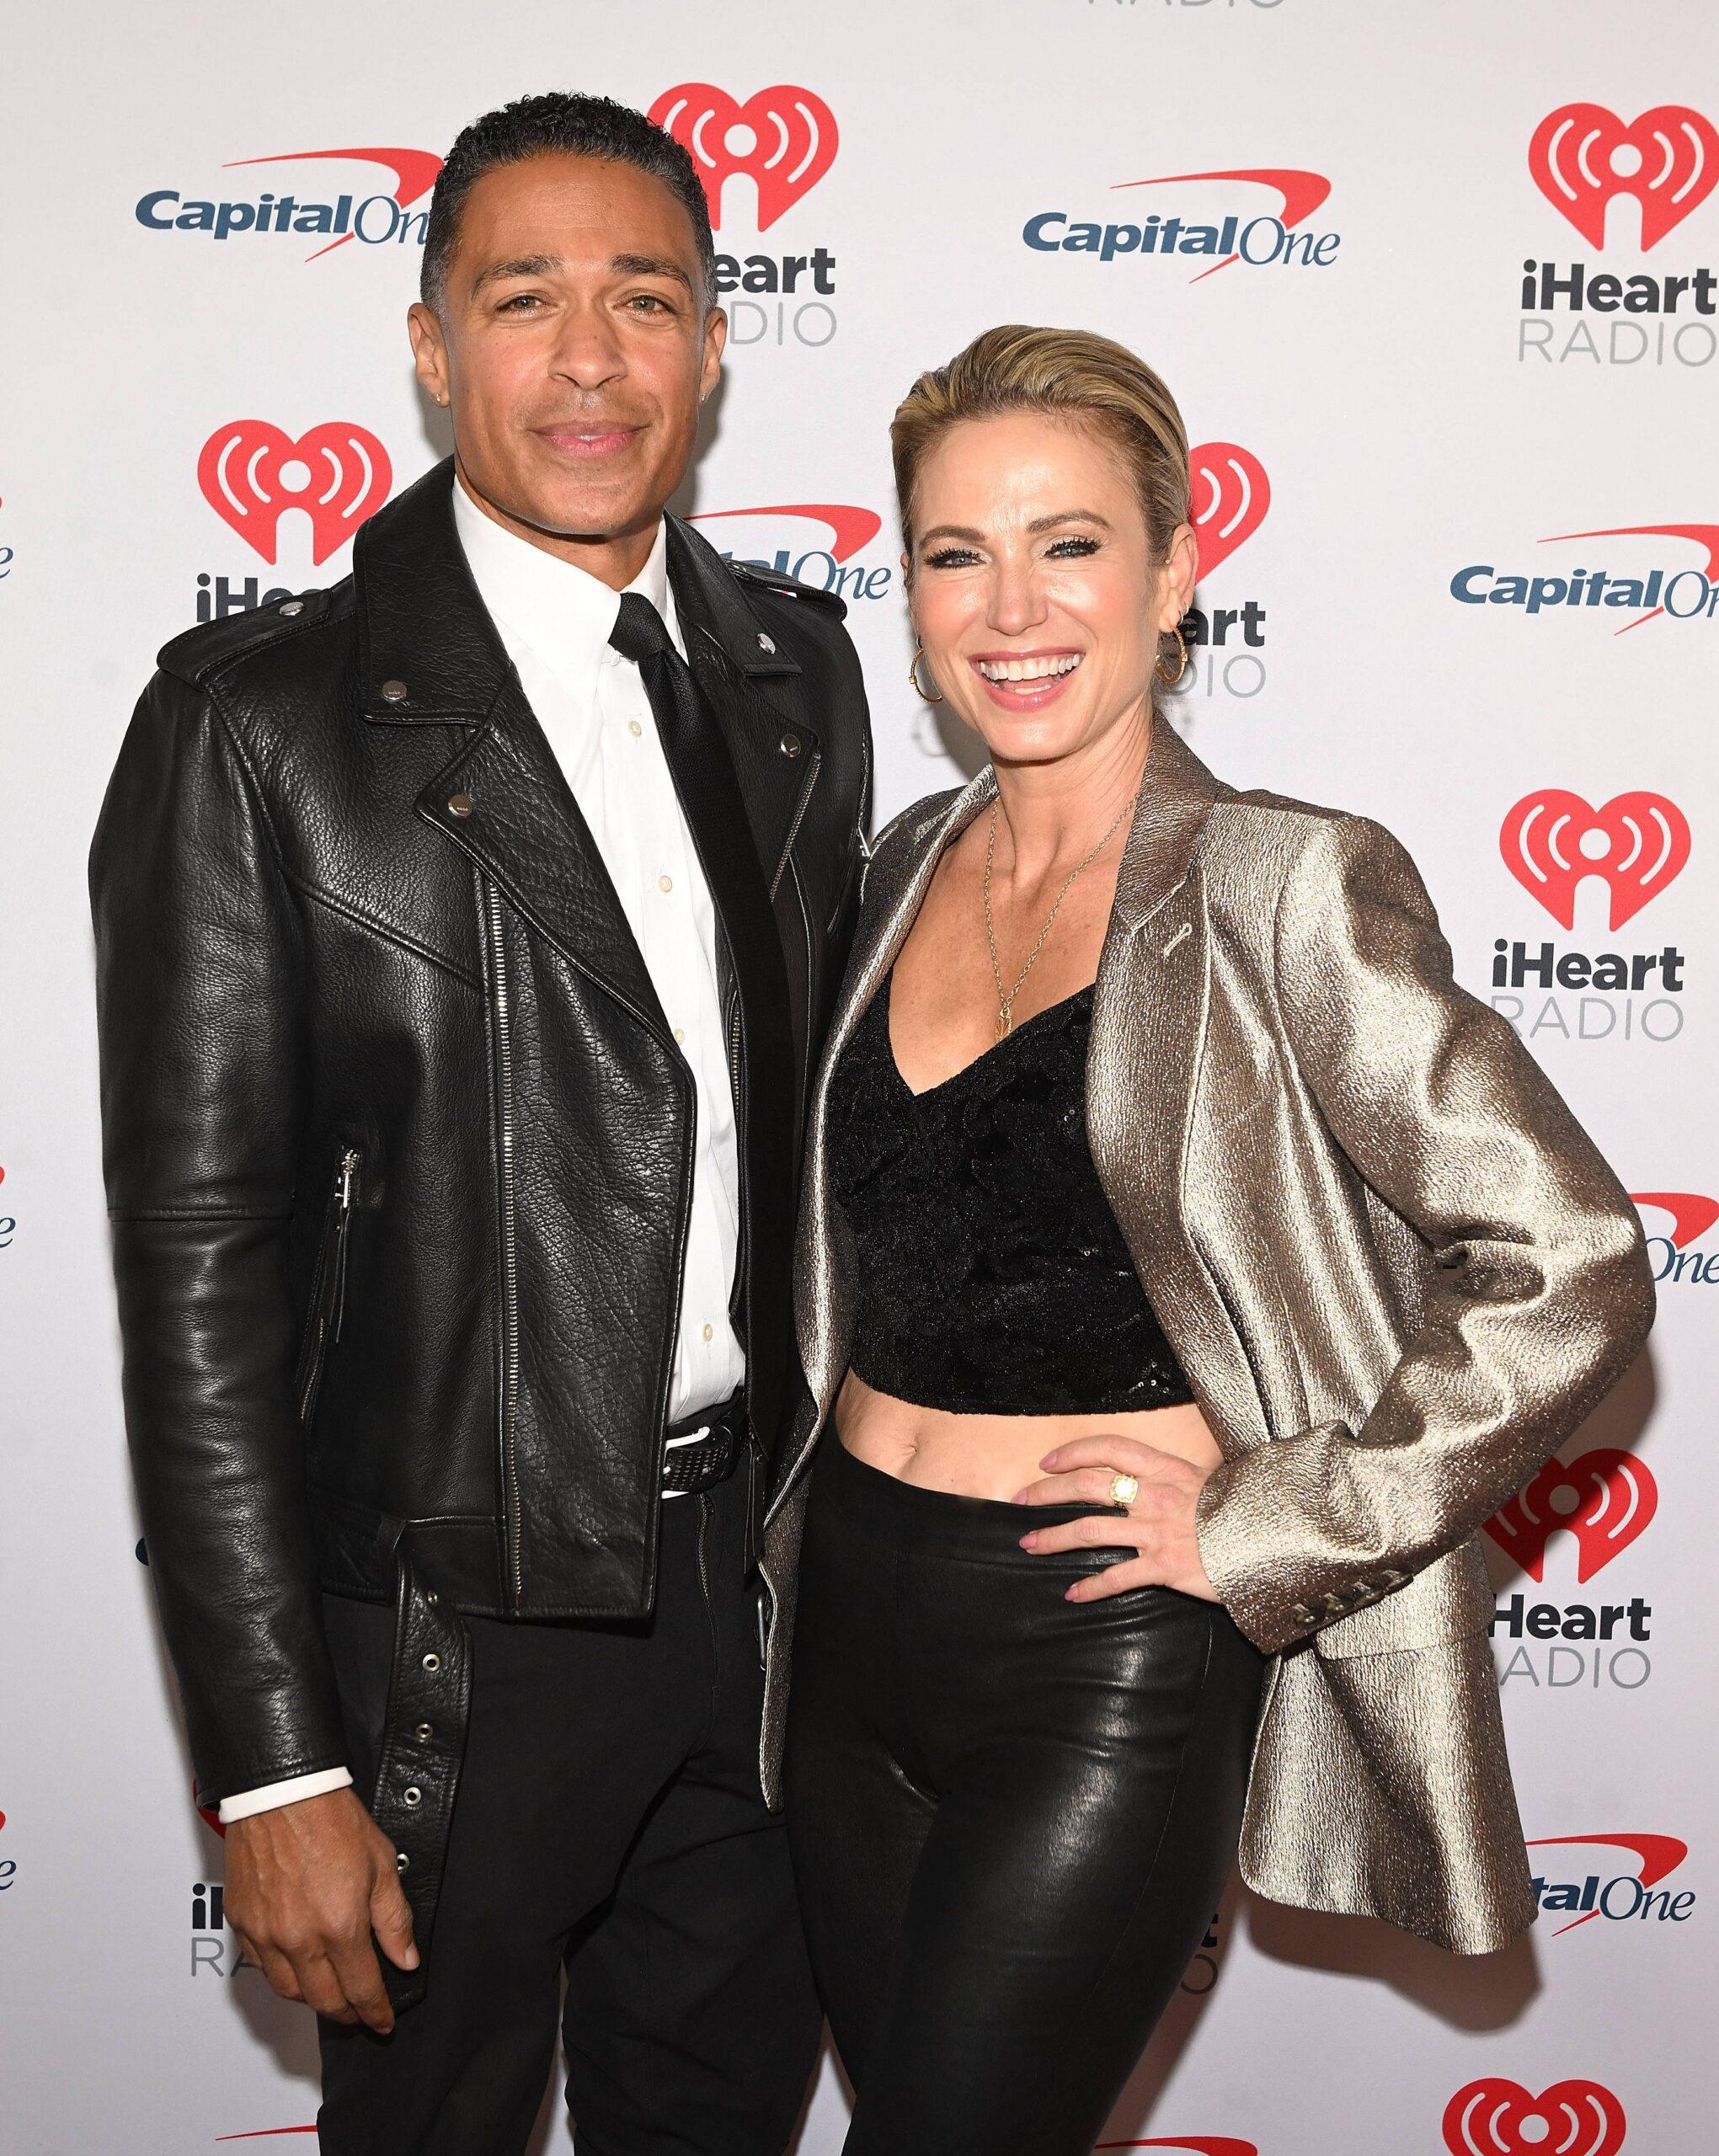 Amy Robach and TJ Holmes Reveal Why They Love Taking Part in 'A Lot of PDA'